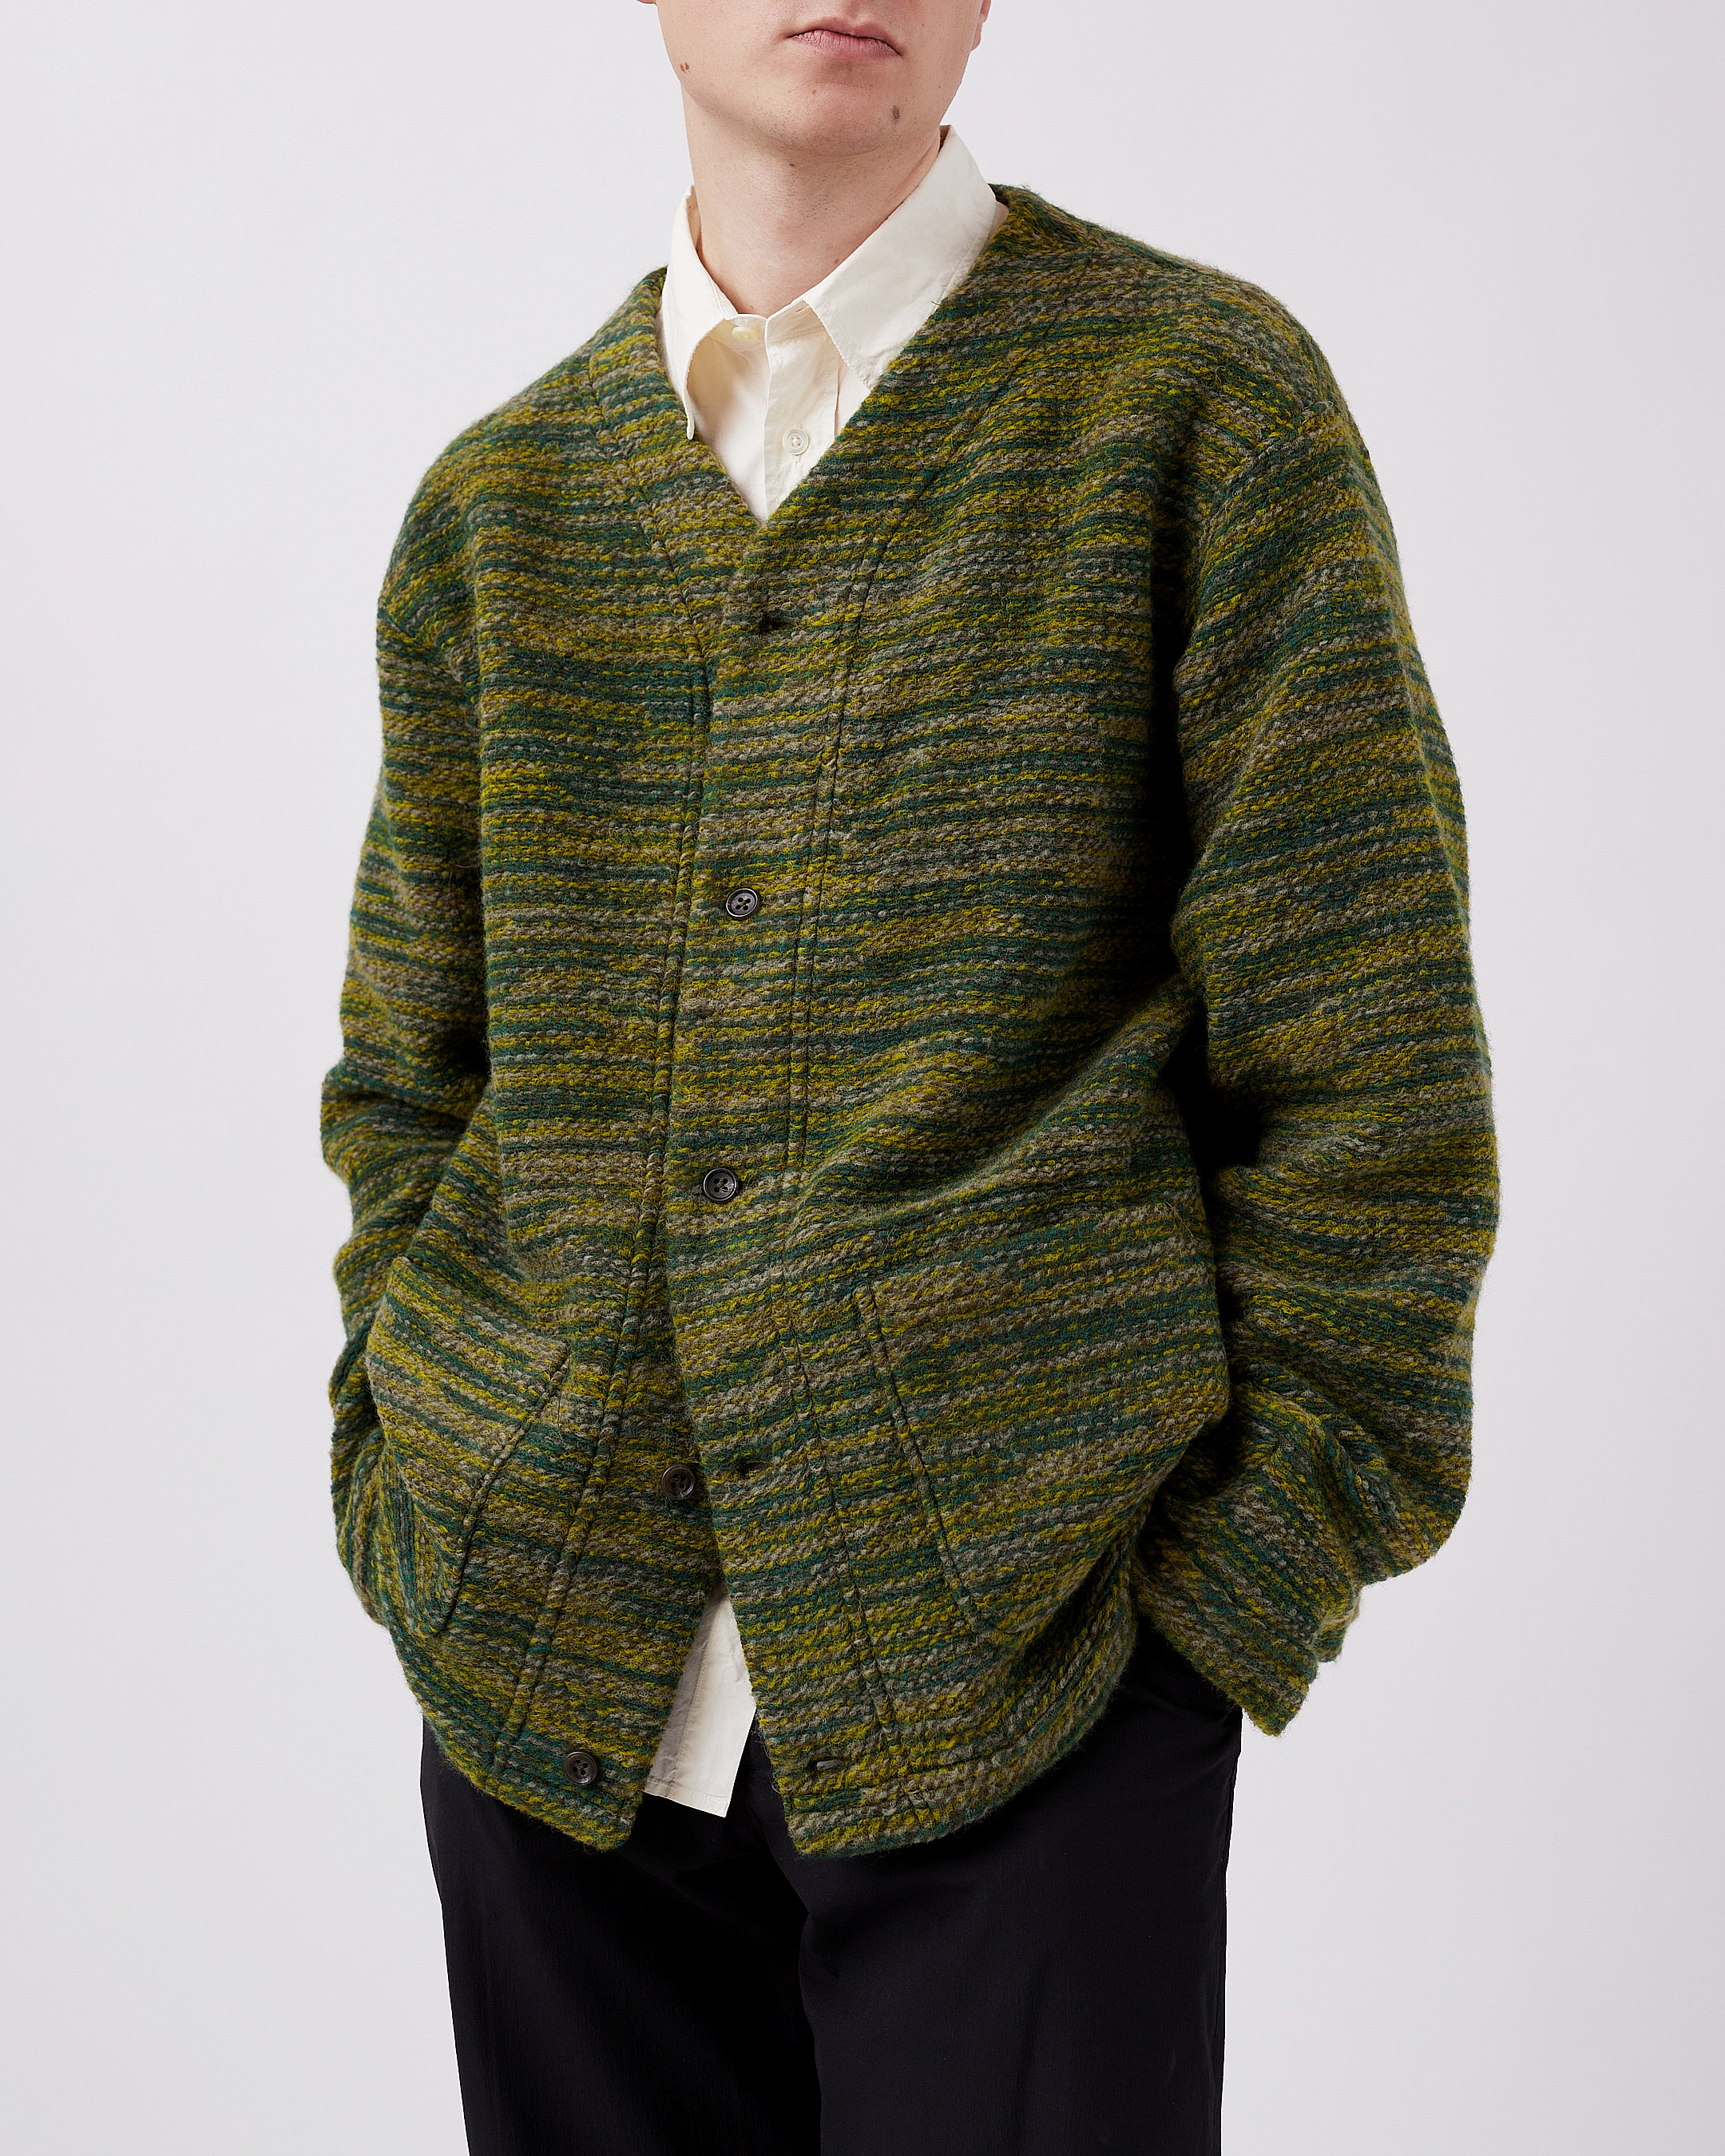 Norse Store | Shipping Worldwide - Engineered Garments Knit